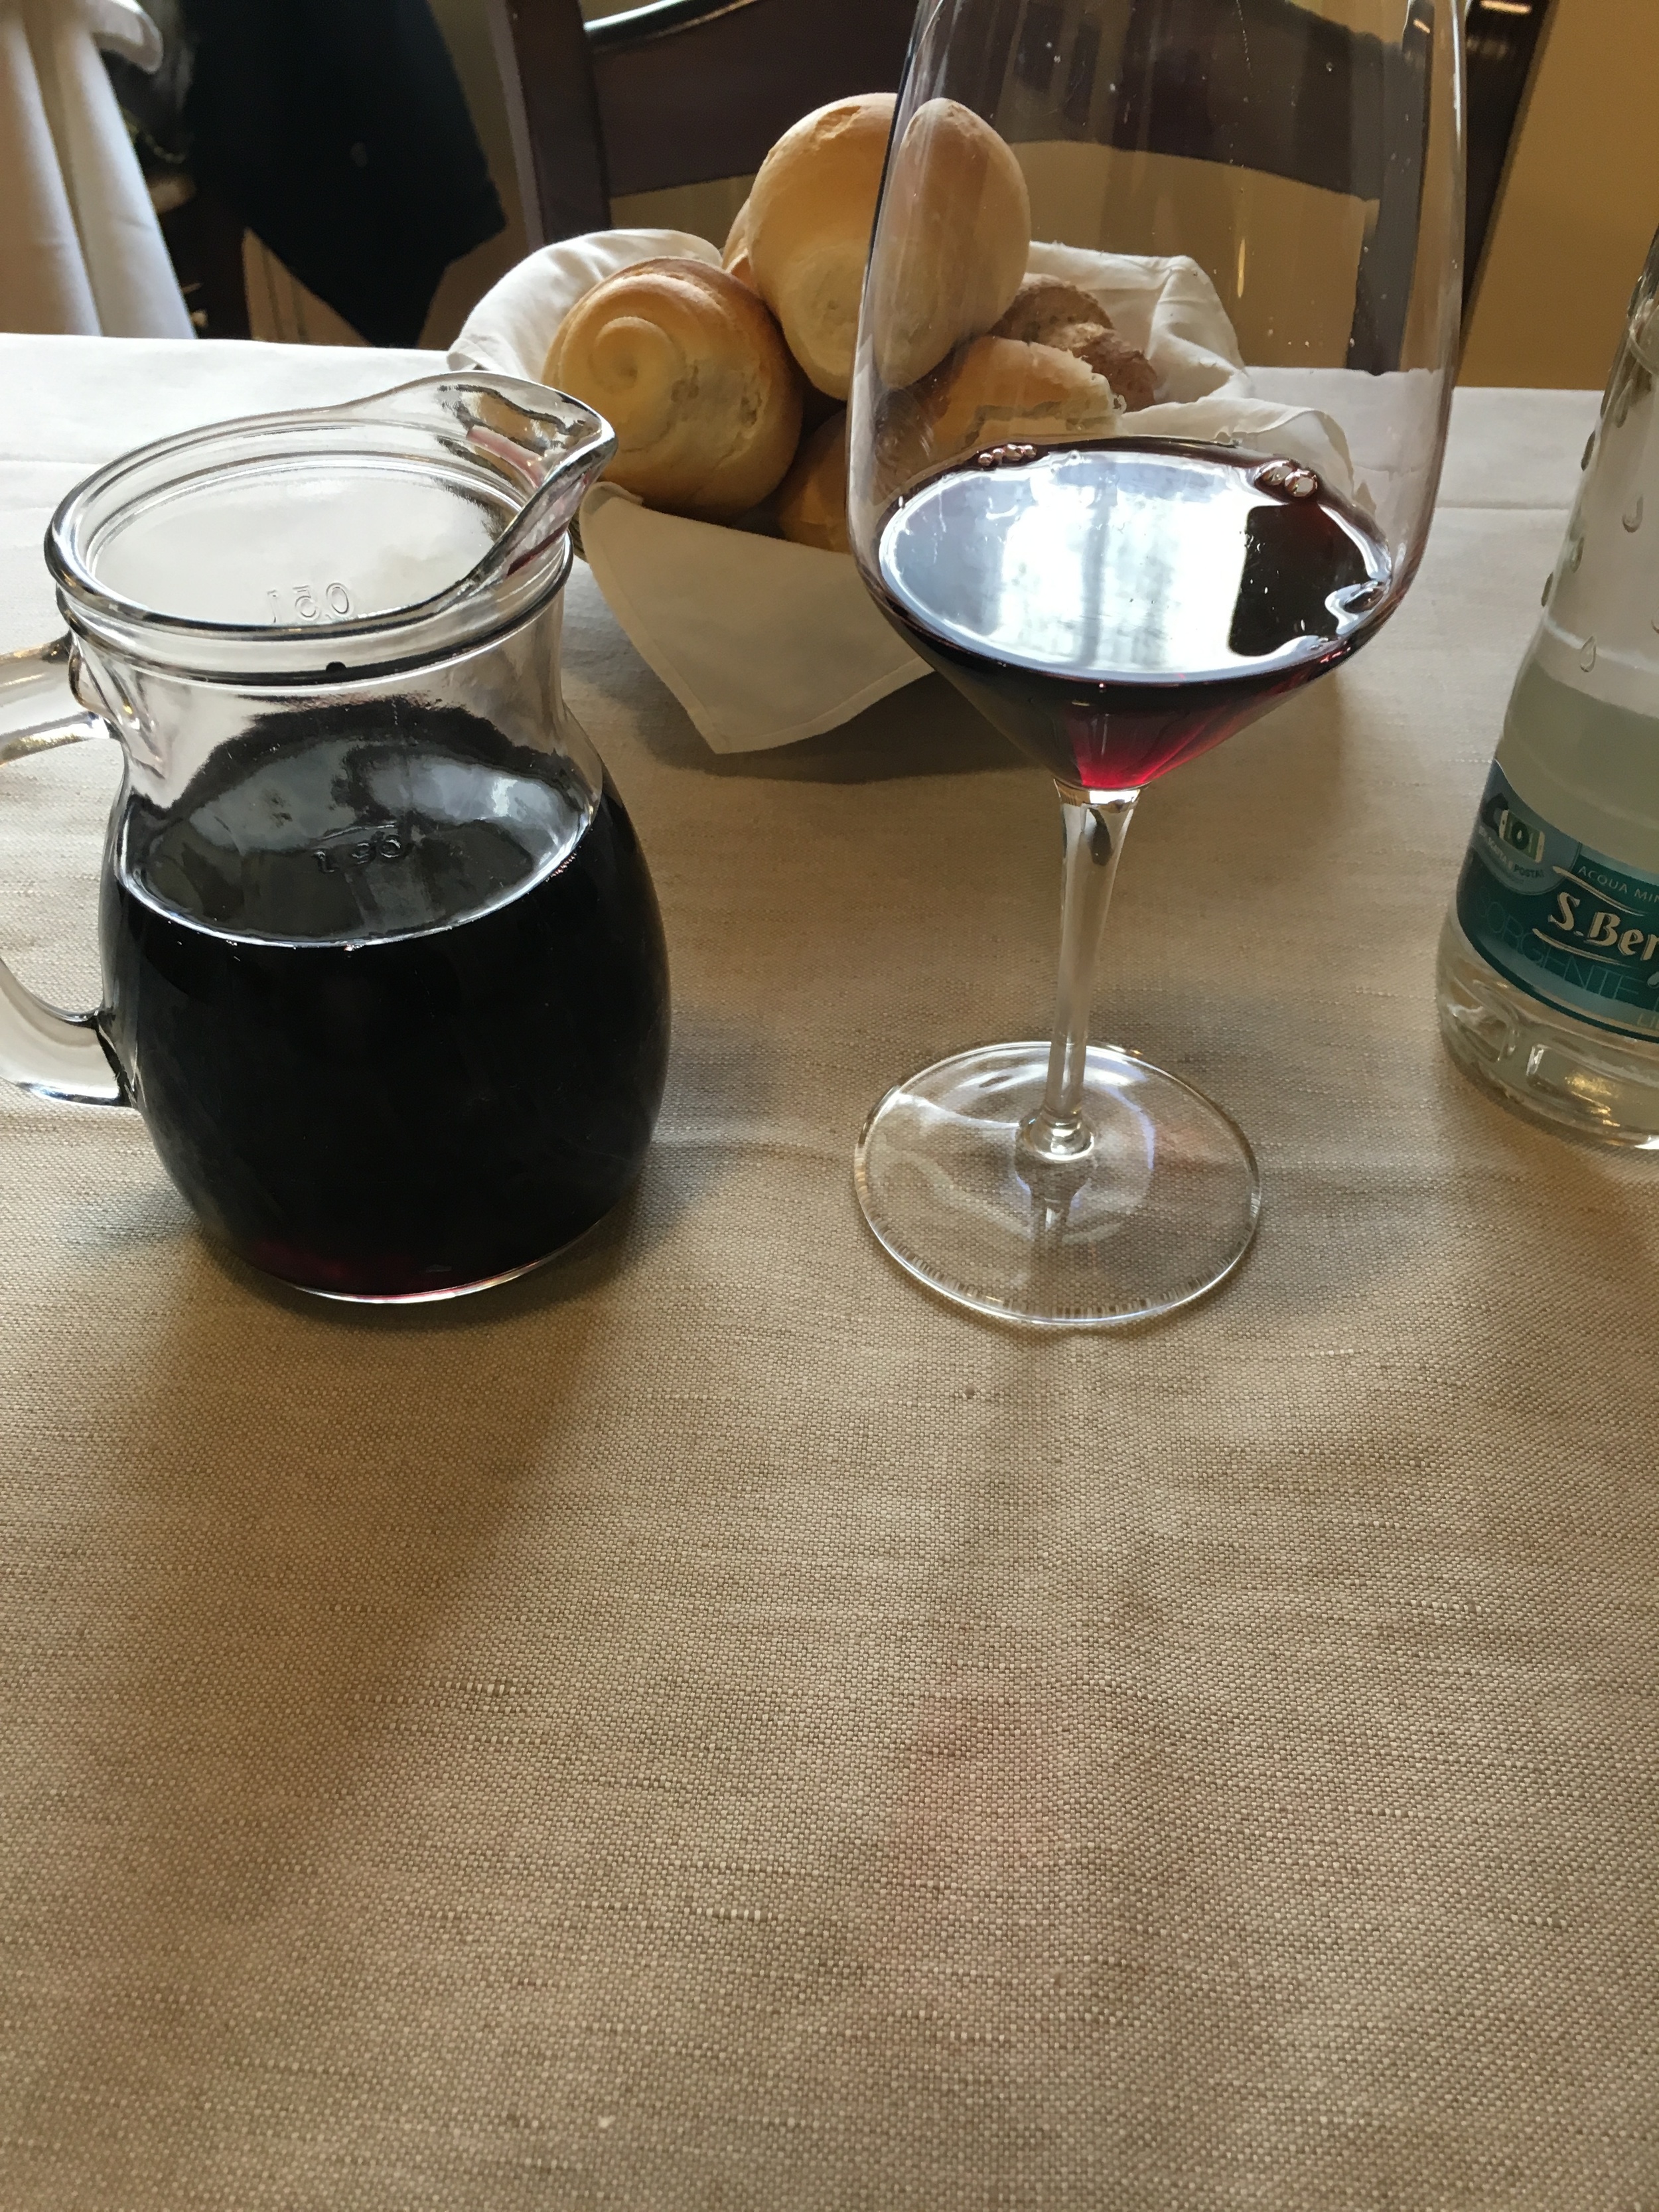 A Jug wine by any other name